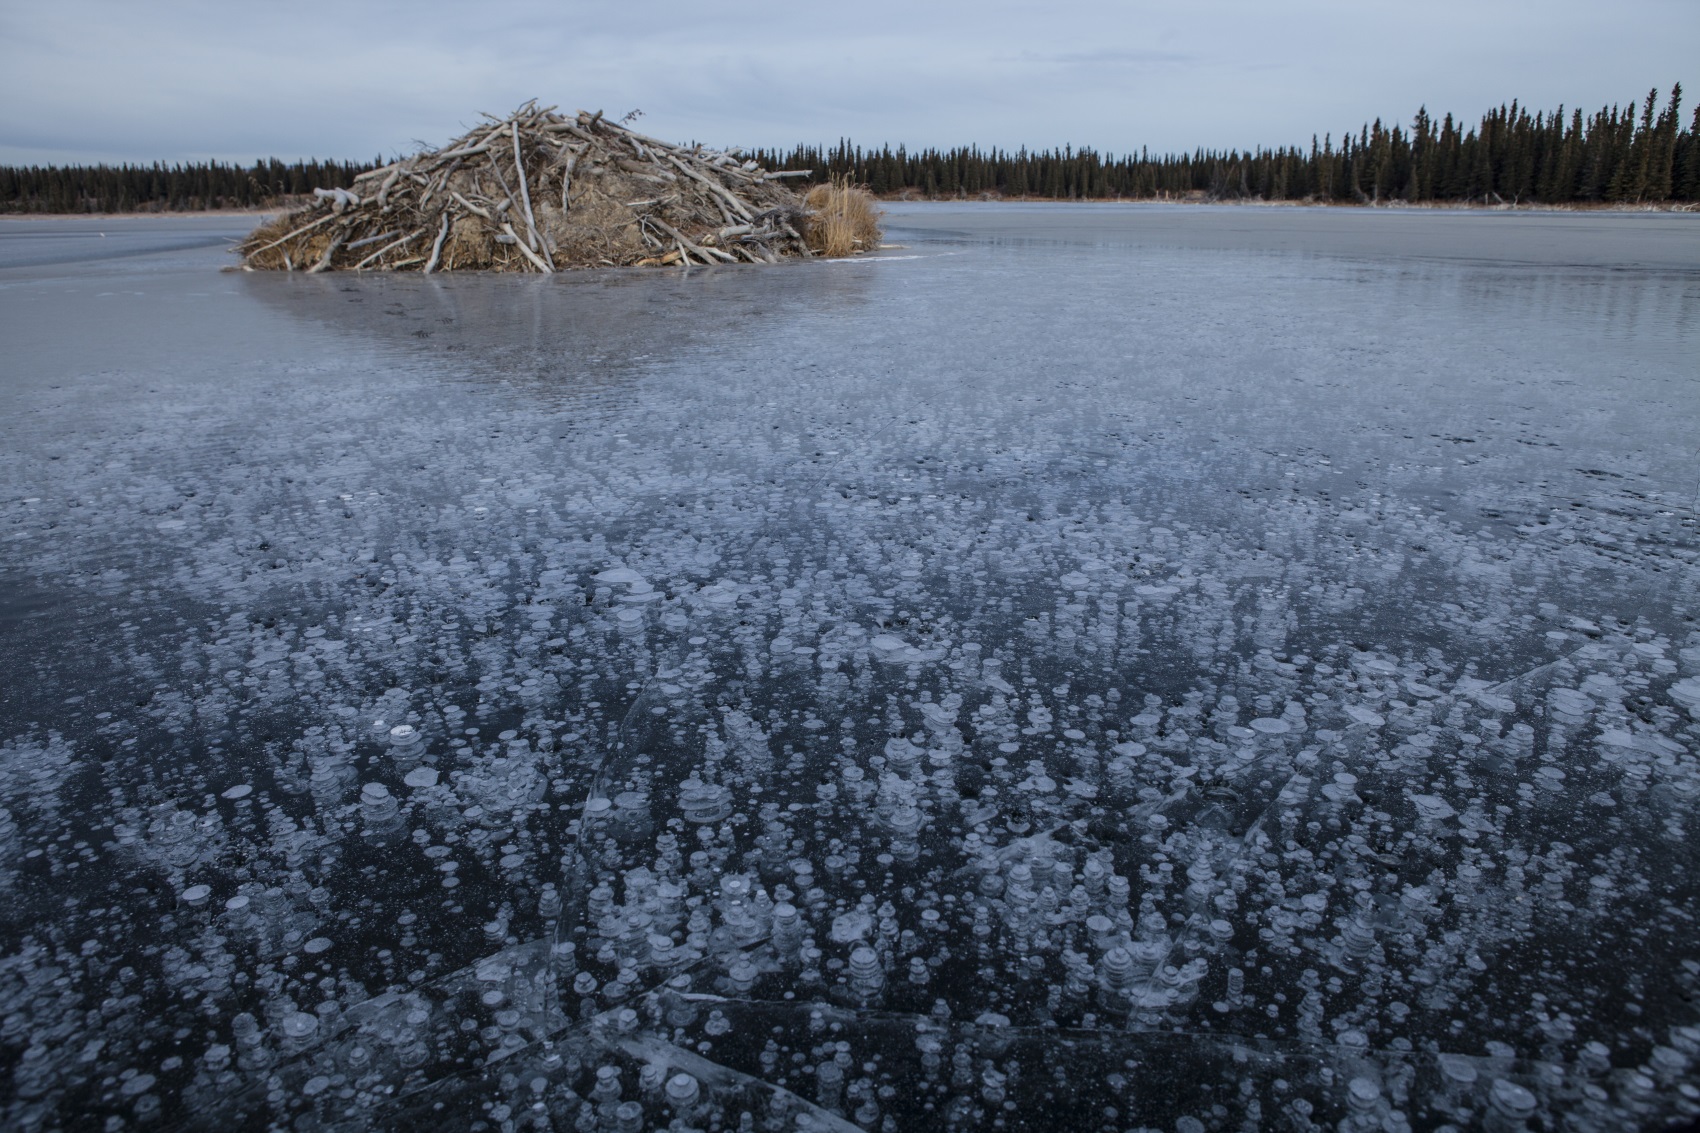 Ice on an Alaskan lake captures methane that has bubbled from the bottom mud.